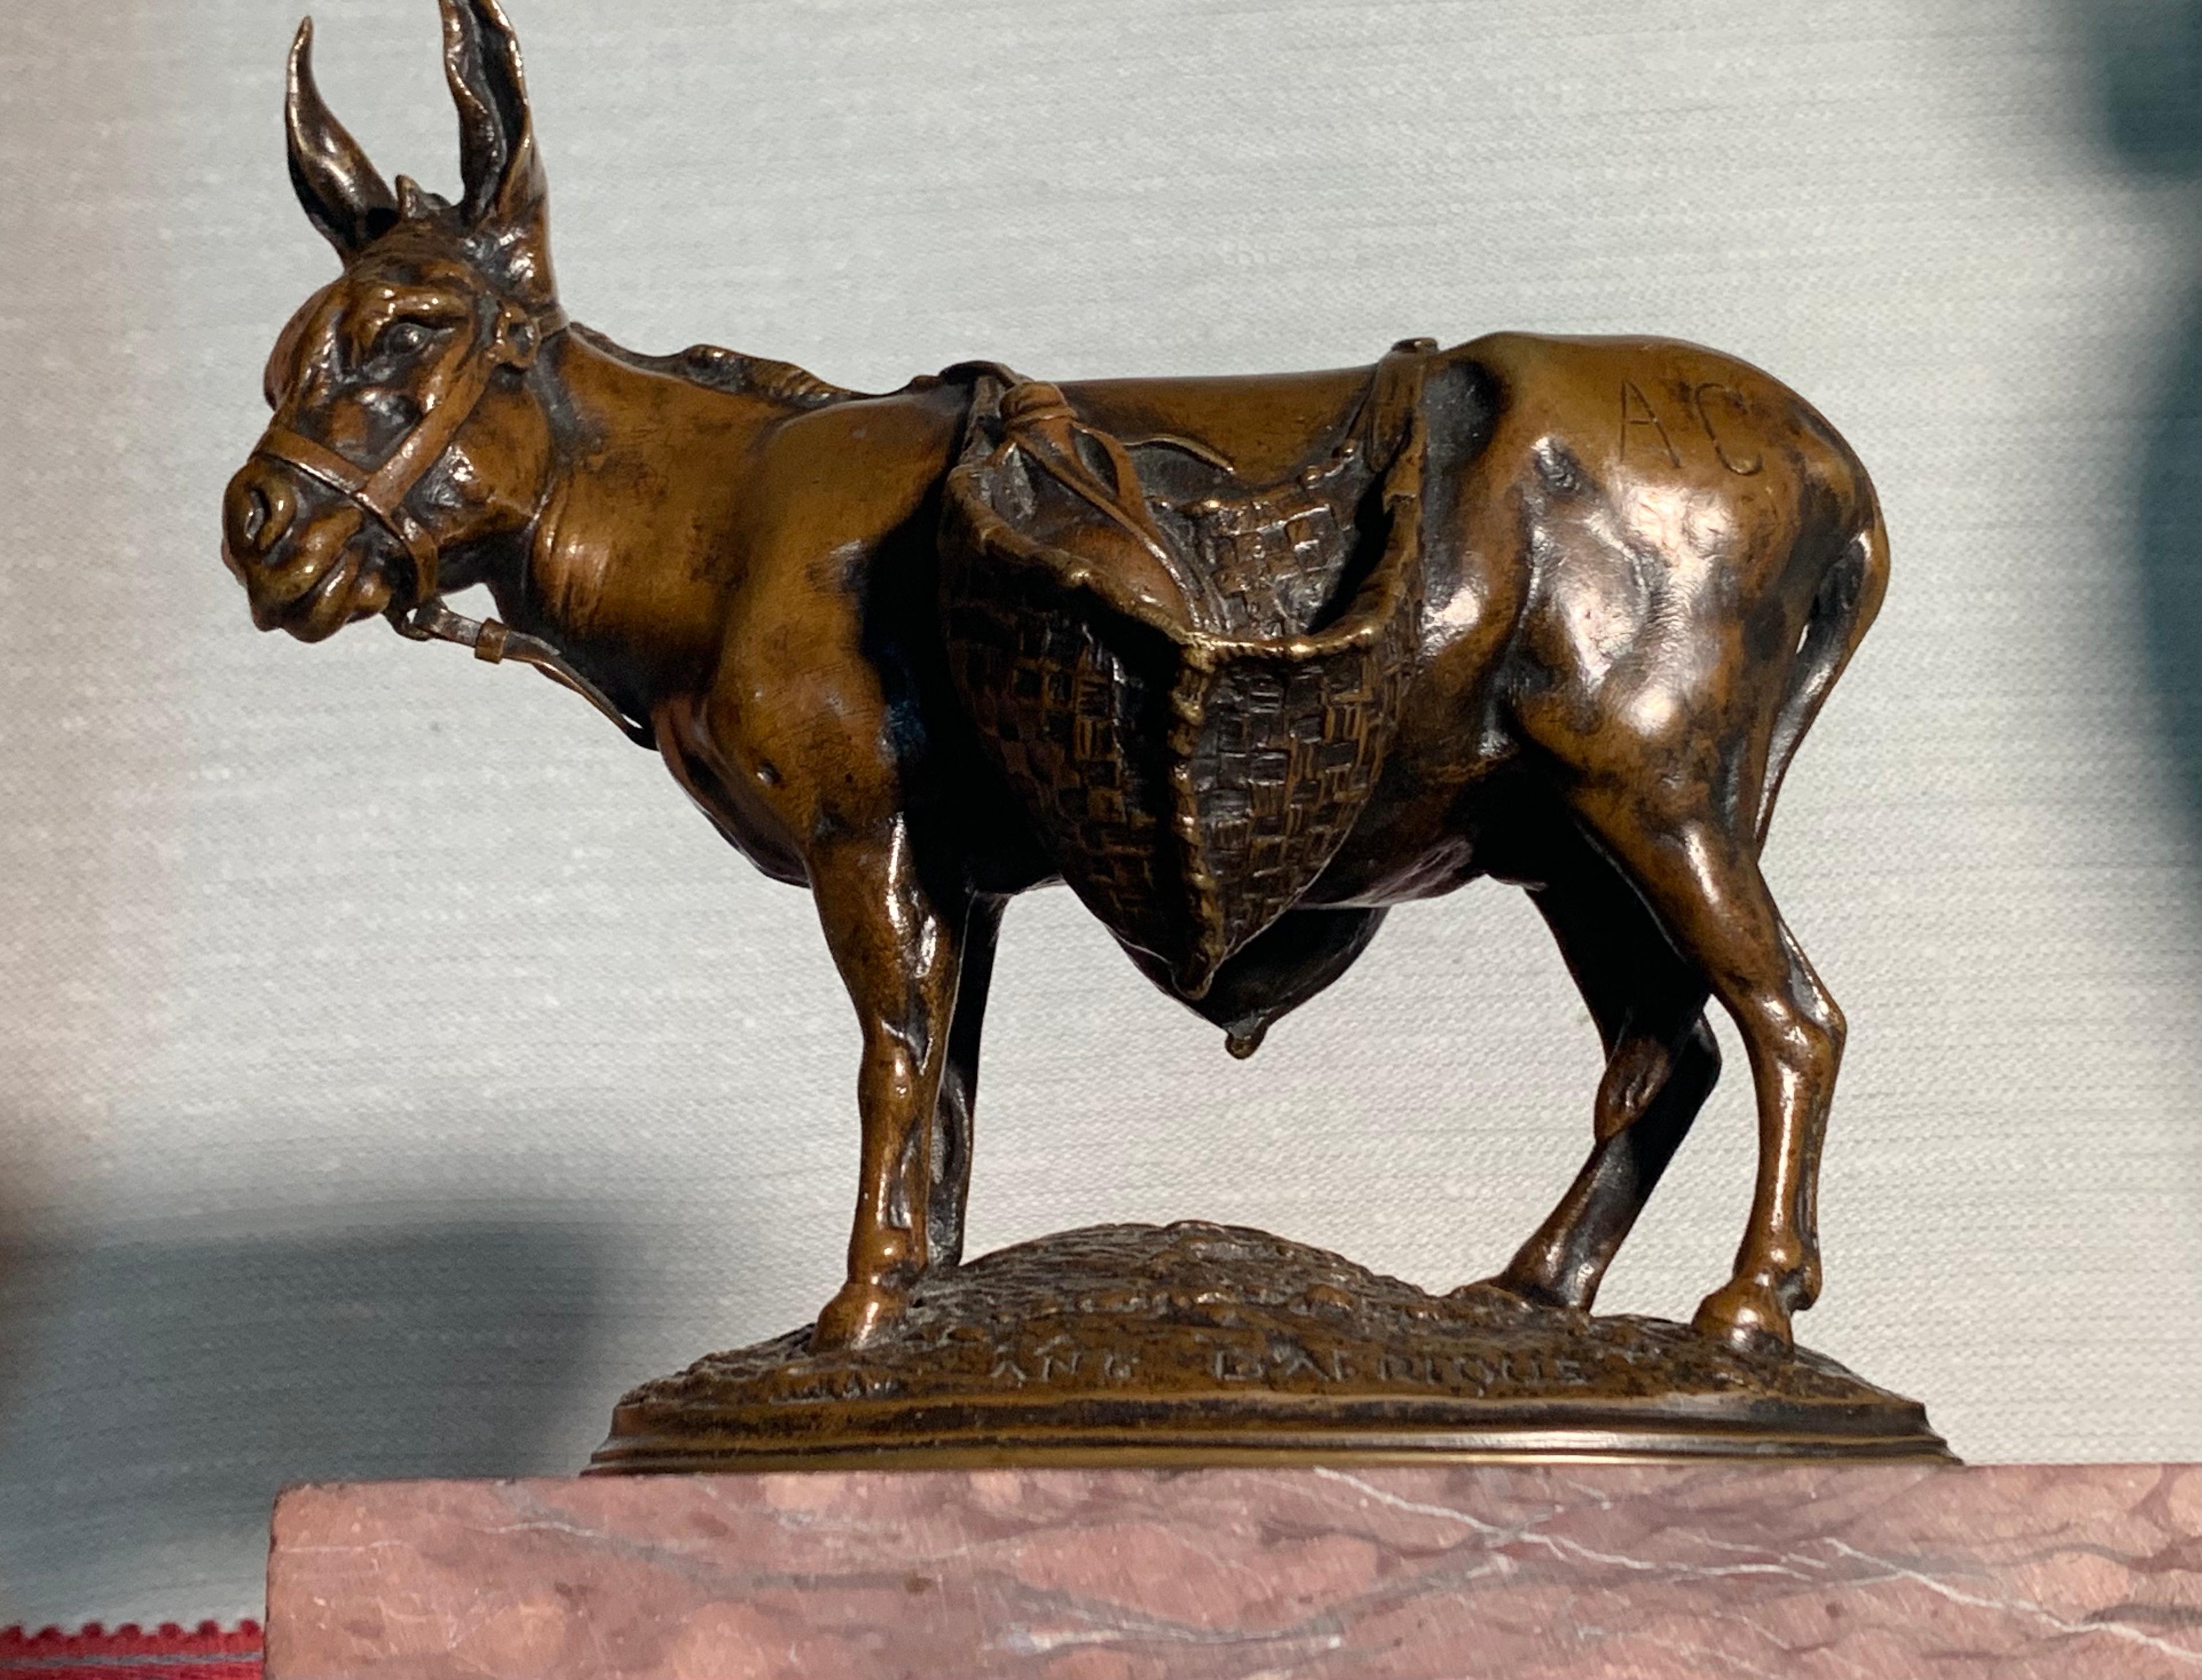 Charming little bronze by the great animal sculptor Auguste-Nicolas Cain, signed A.Cain on the side, inscribed Ane d’Afrique (Donkey from Africa)  and Susse Fres  on the terrace. The donkey is represented loaded with its woven baskets in a vivid